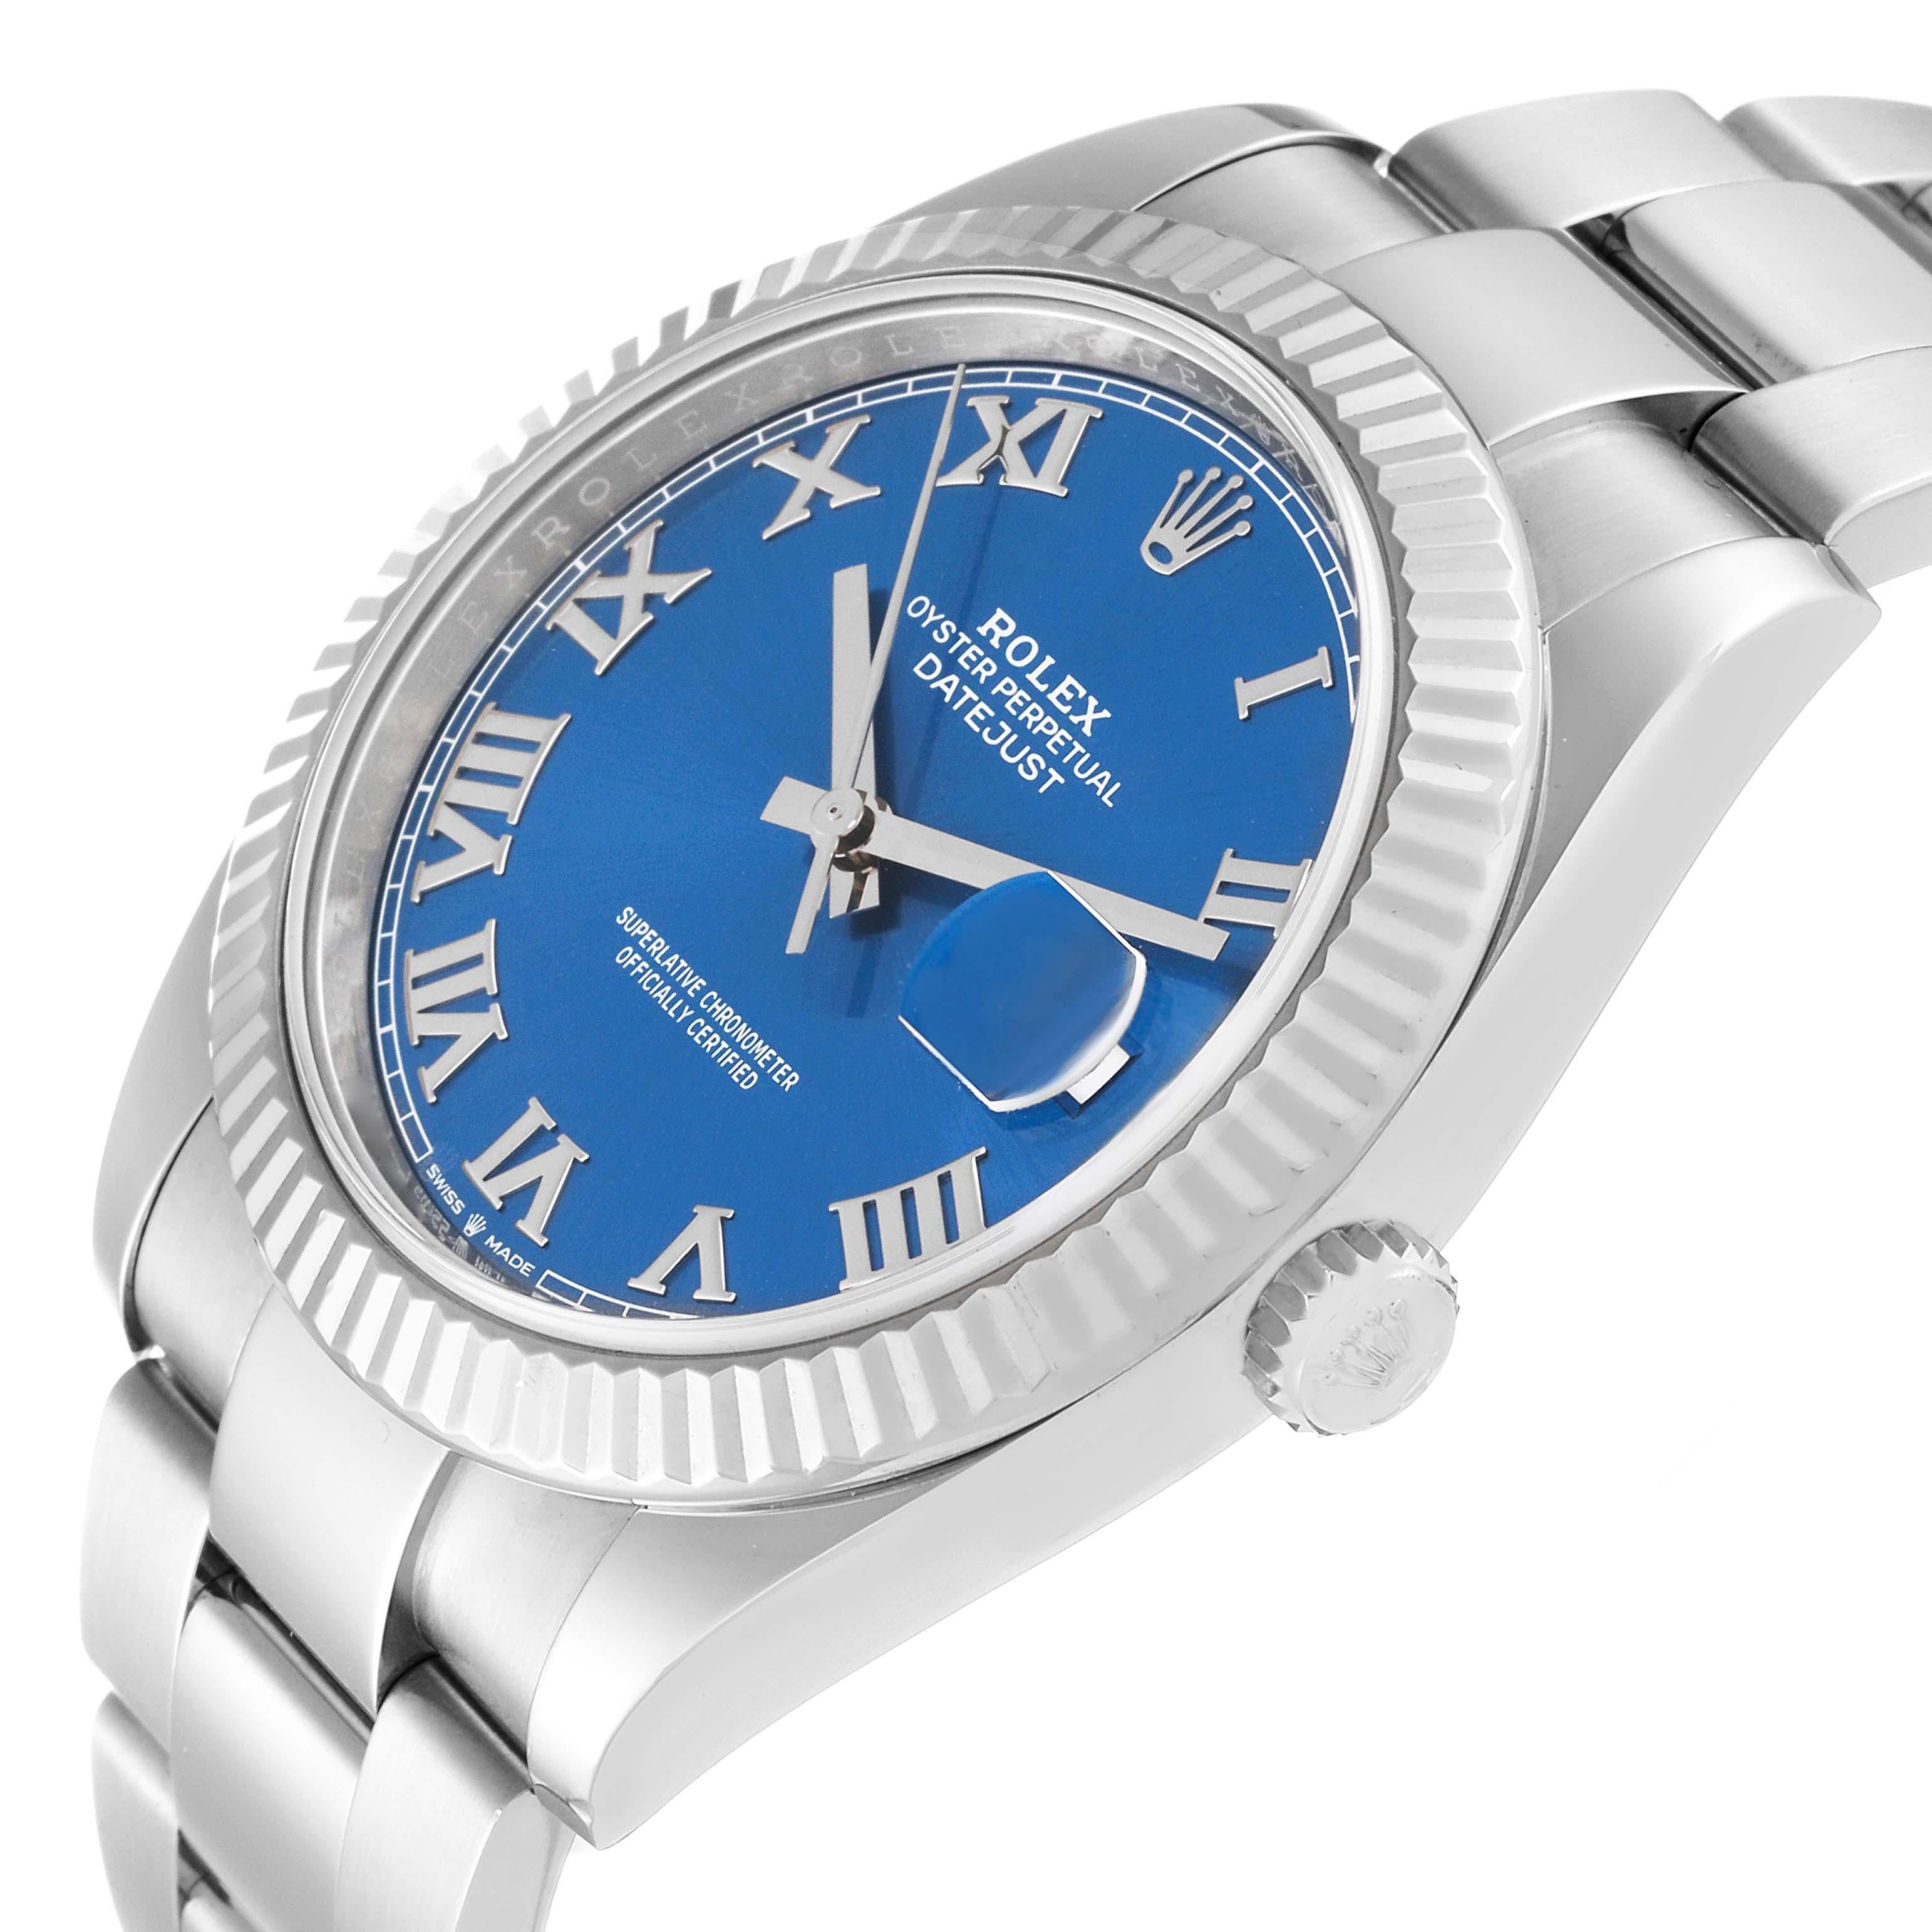 Rolex Datejust 41 Steel White Gold Blue Roman Dial Mens Watch 126334 For Sale 1